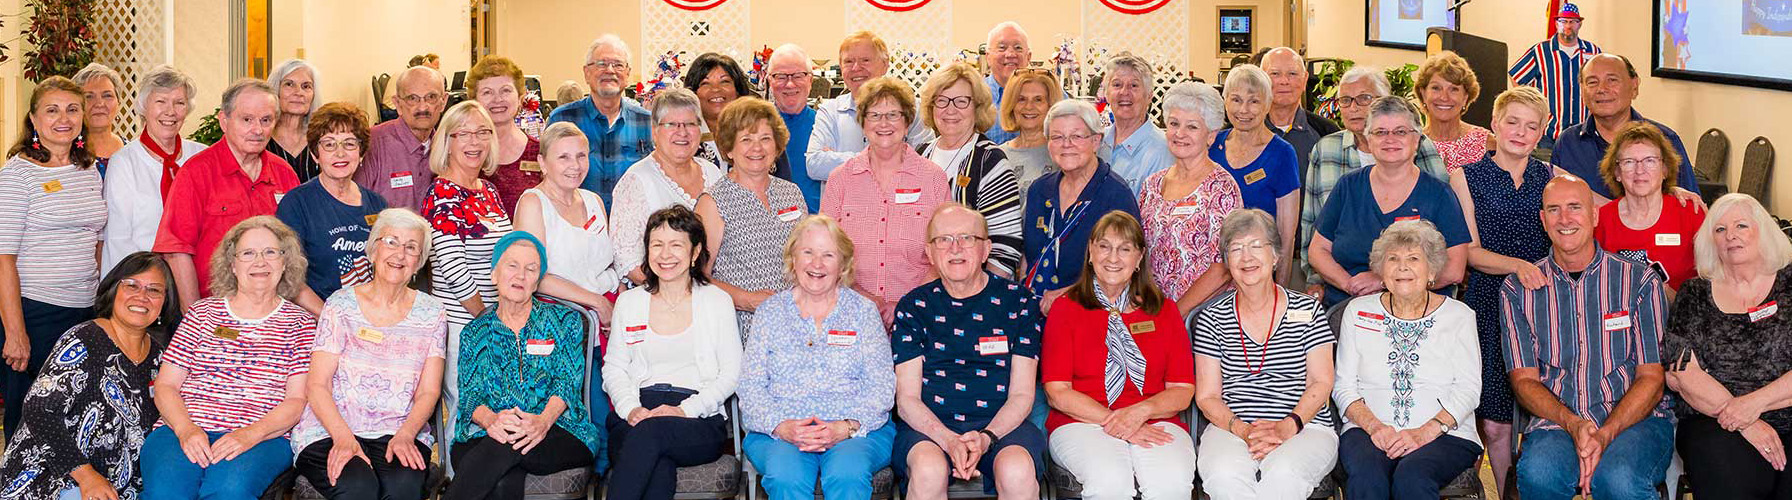 group photos at retiree event